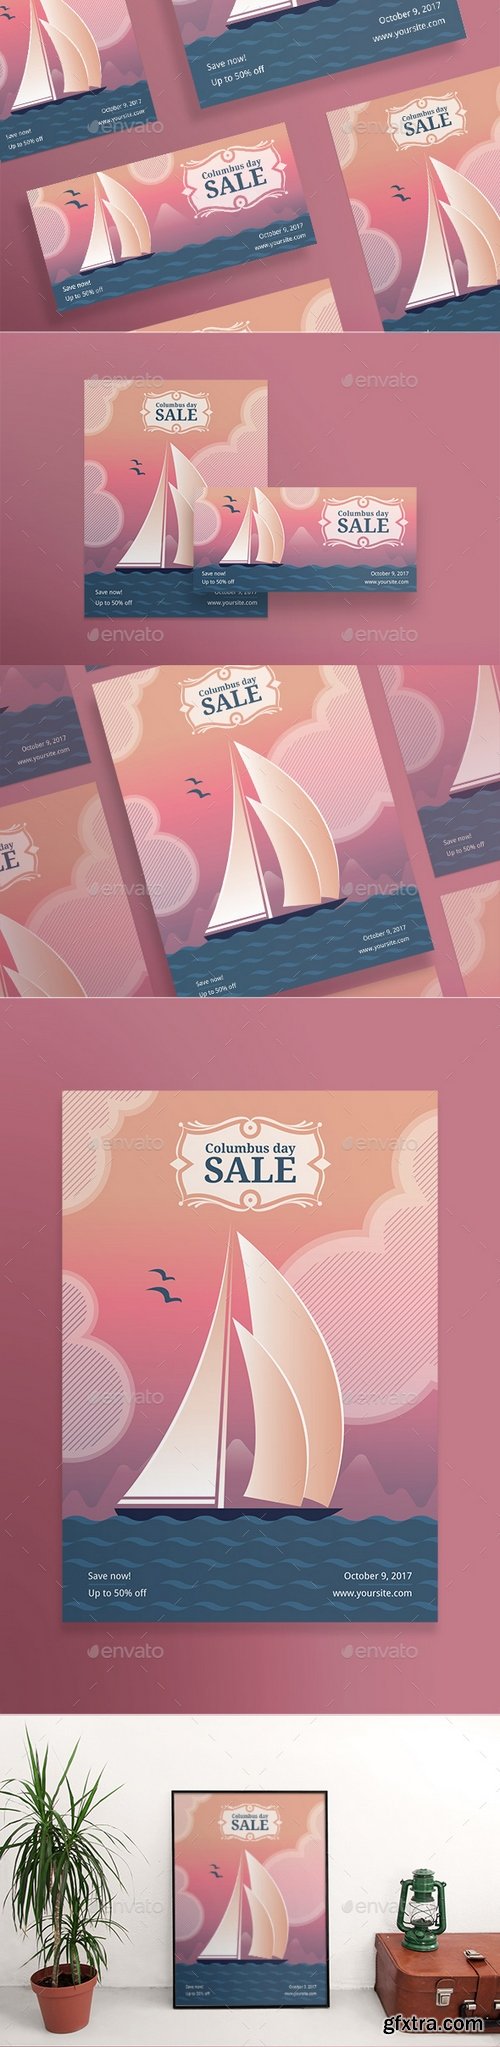 Graphicriver - Columbus Day Flyers 20678126